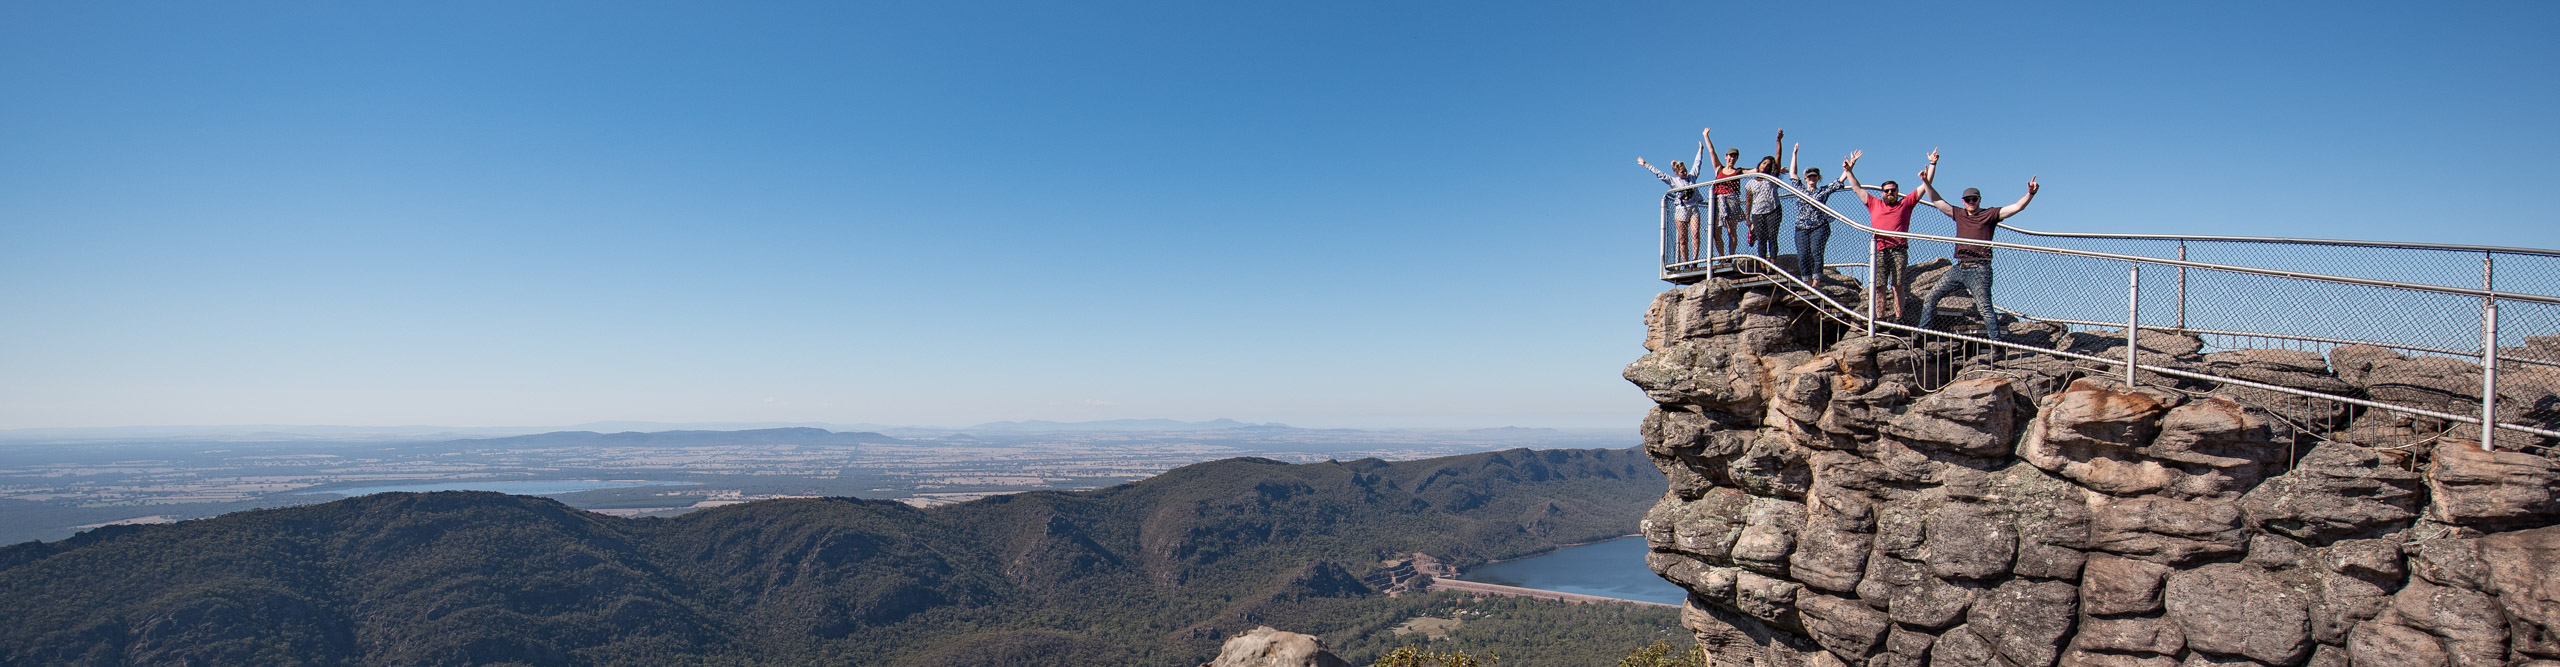 Group at the Pinnacle lookout point in the Grampians, on a sunny cloudless day, Victoria, Australia